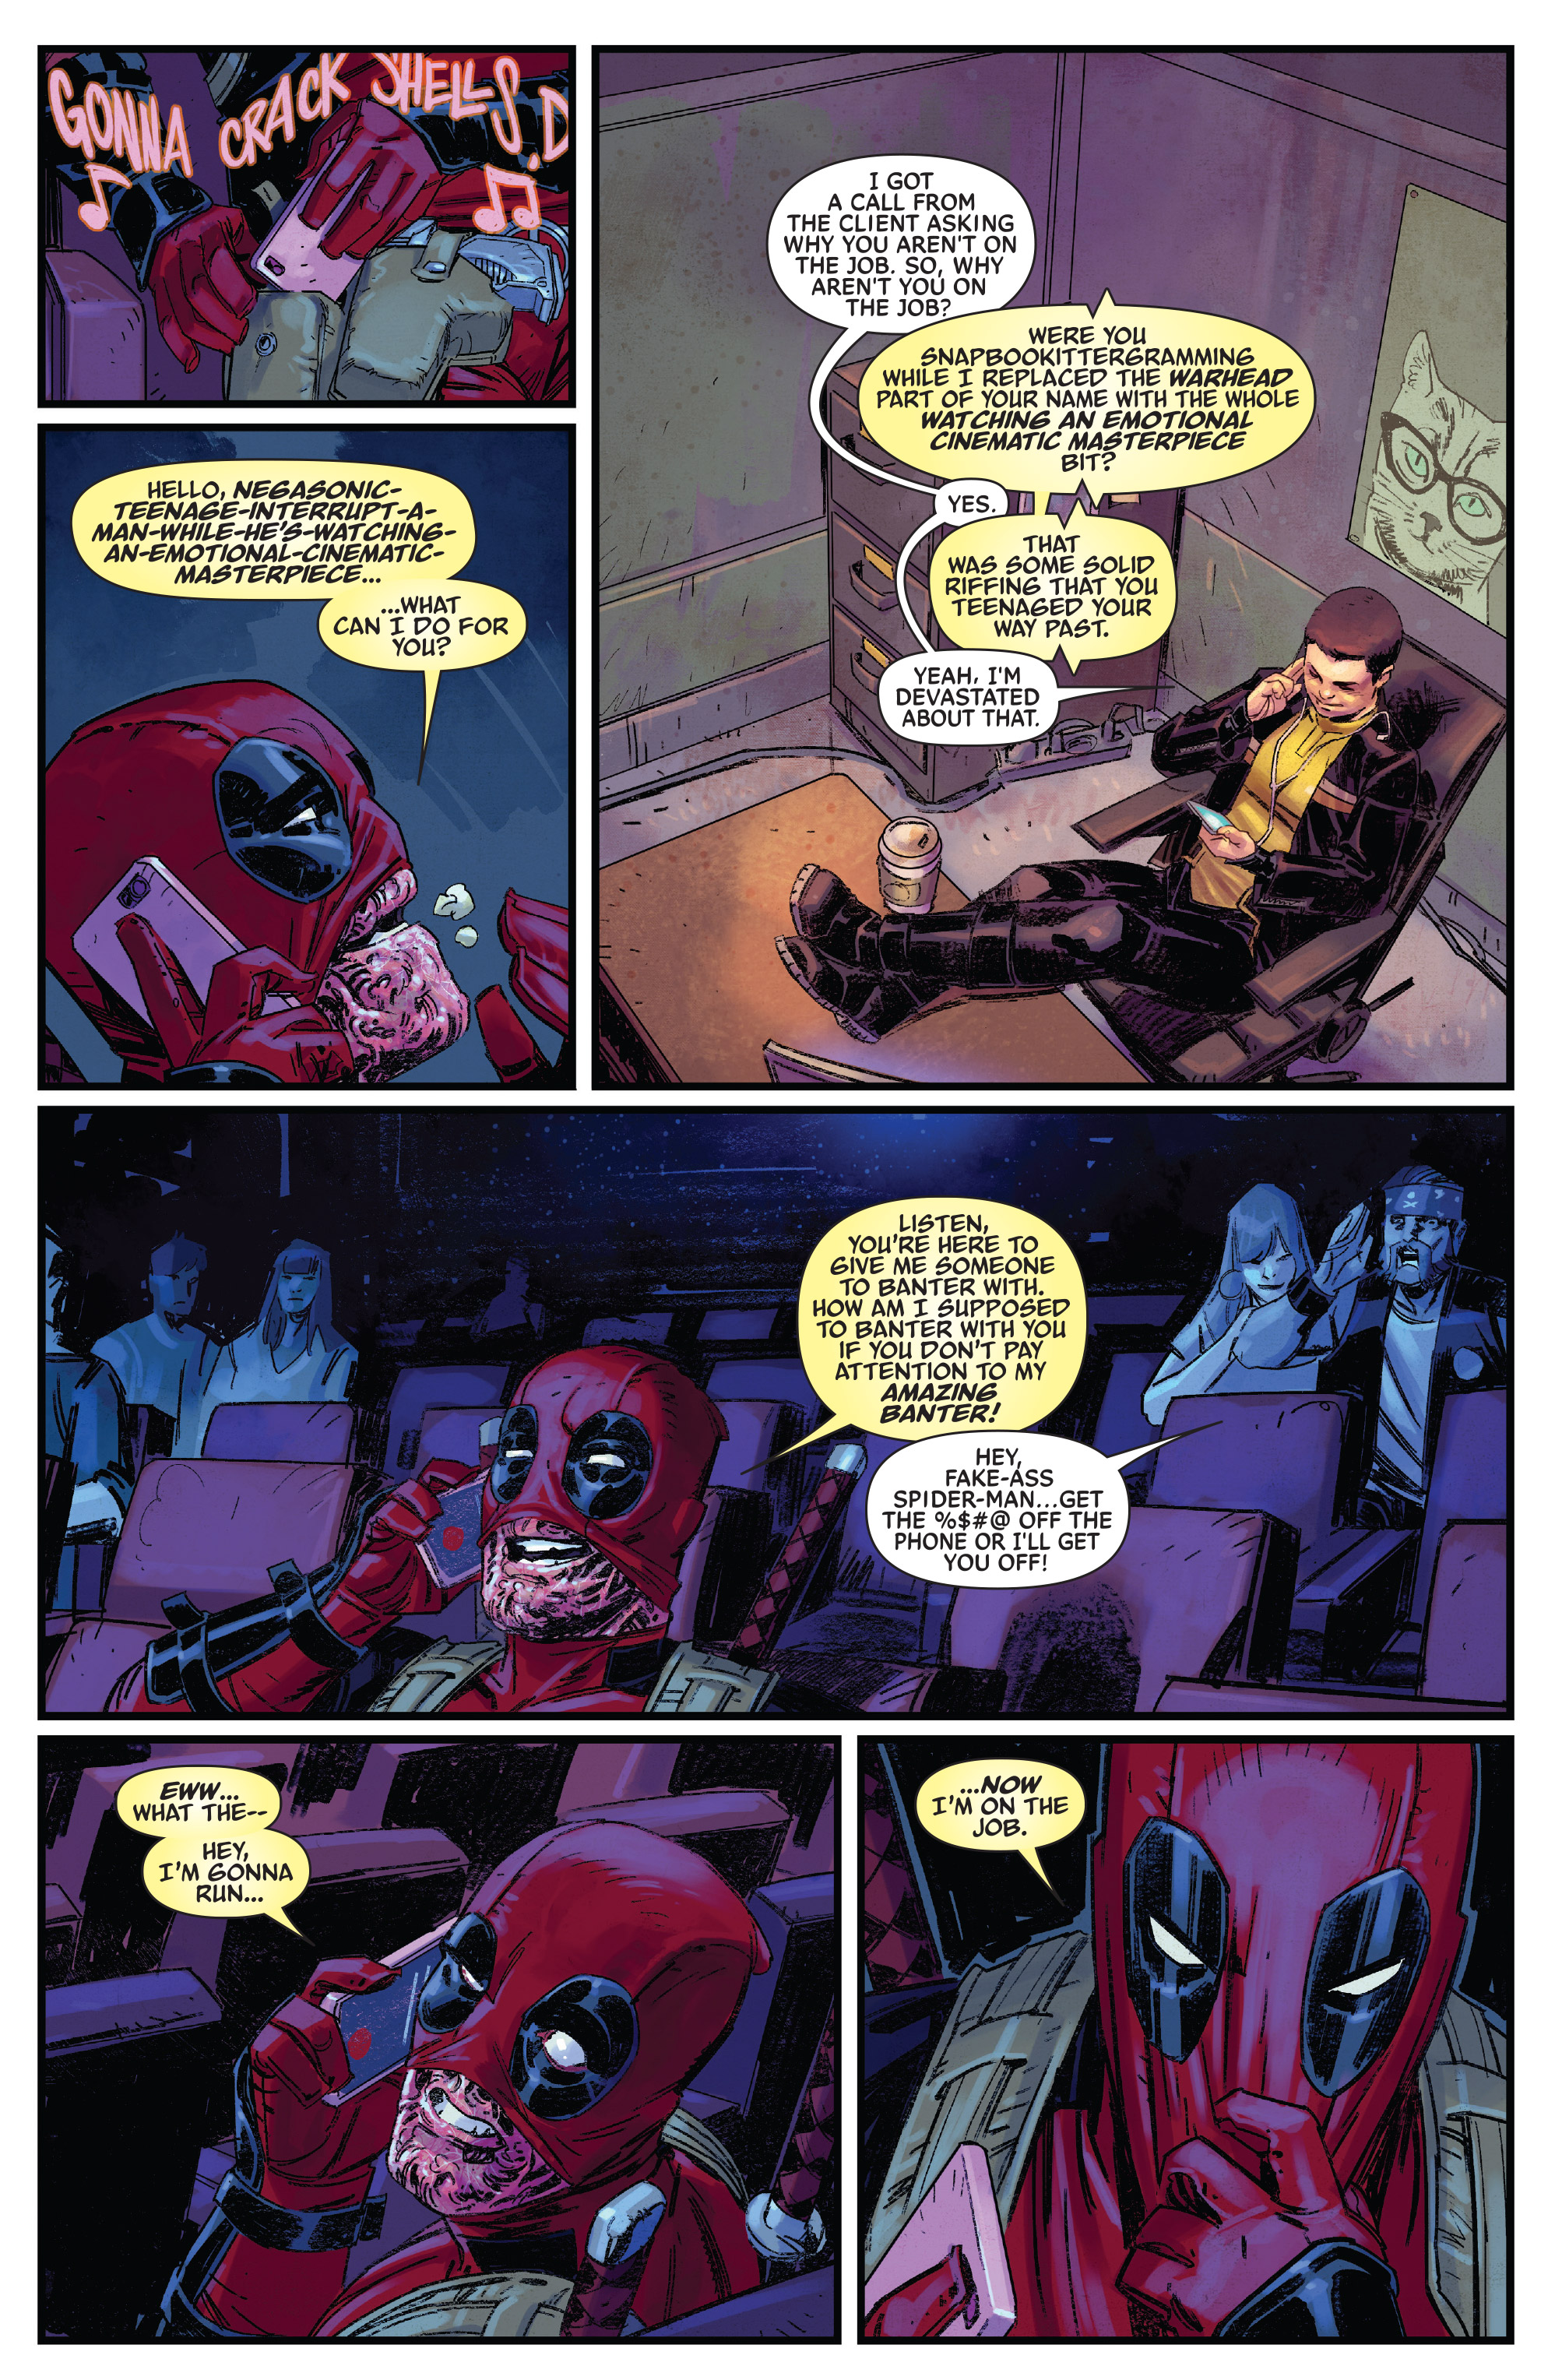 Deadpool (2018-): Chapter 1 - Page 3